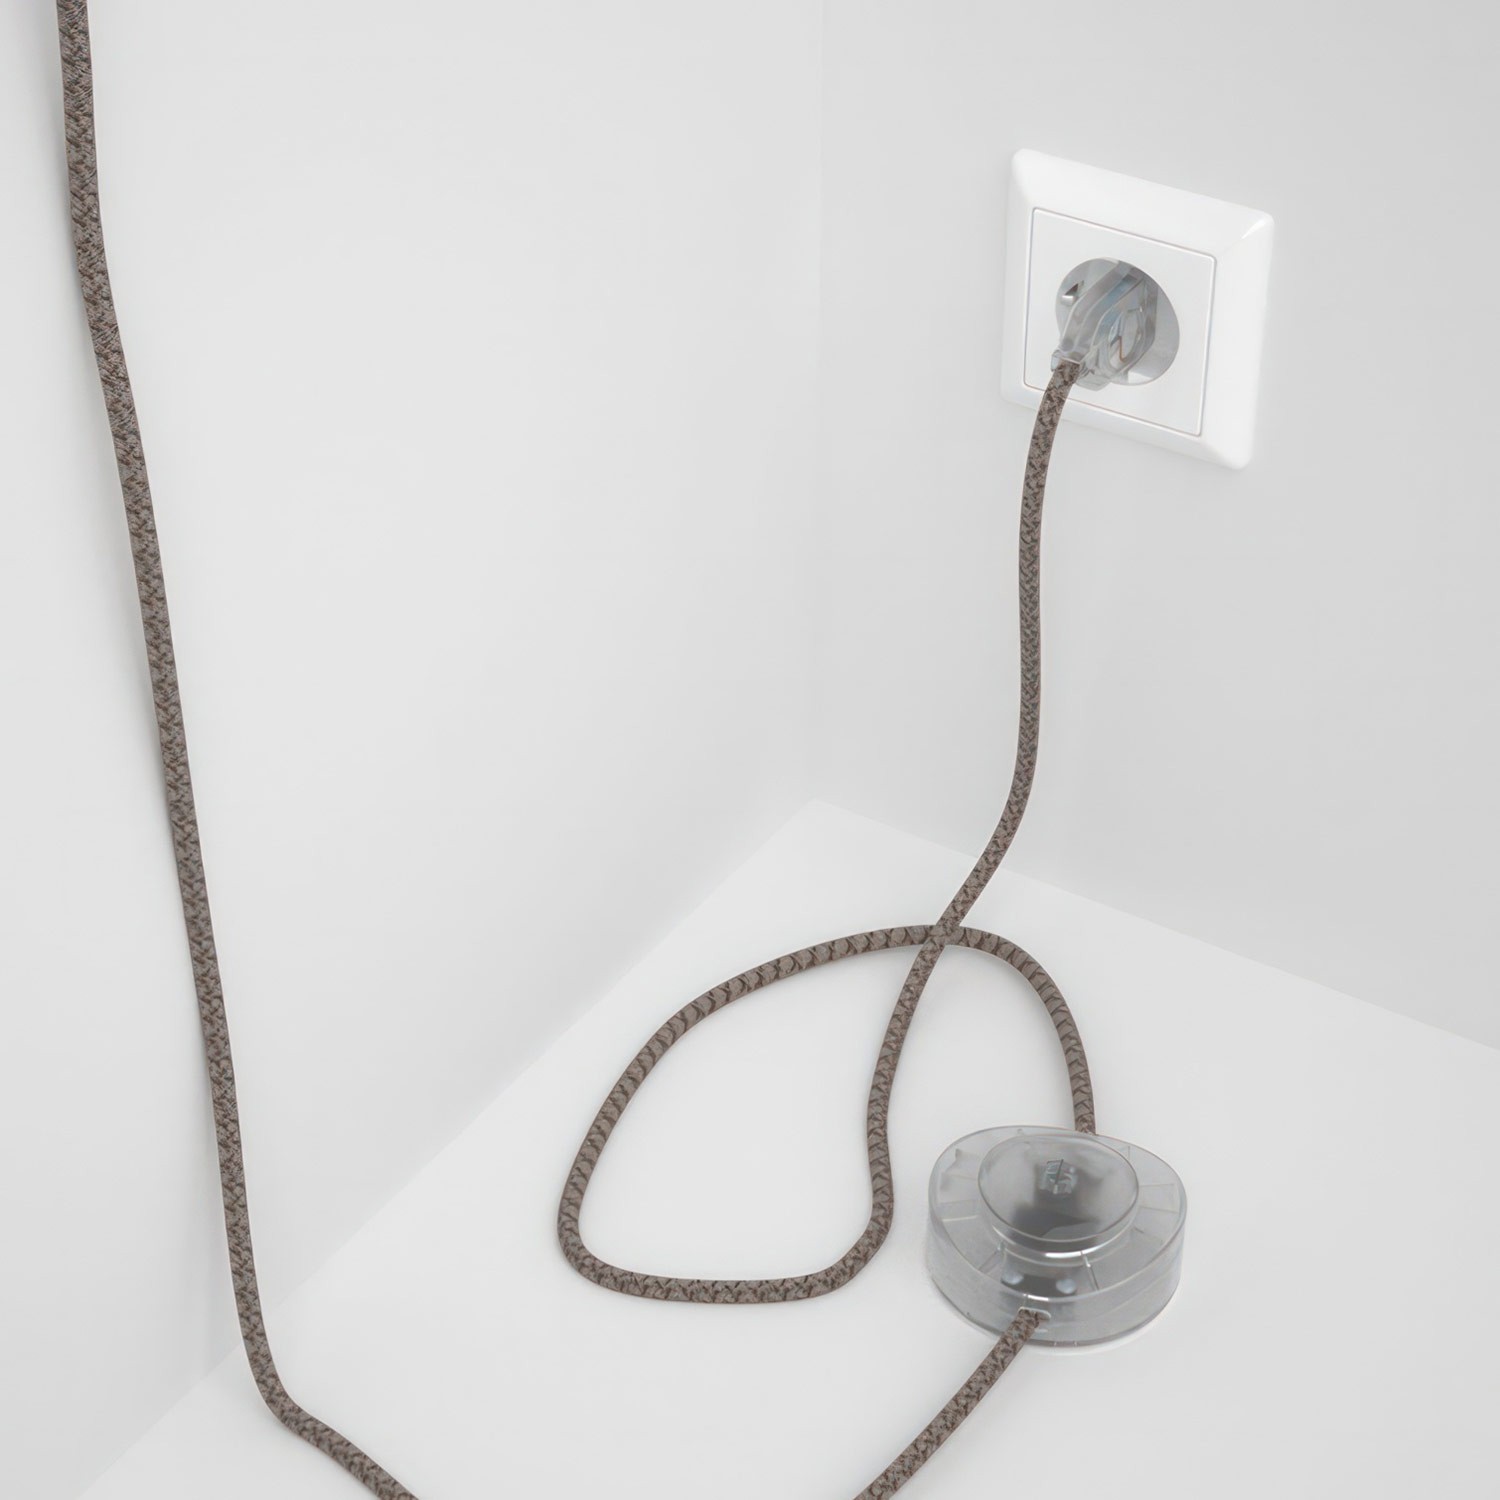 Wiring Pedestal, RD63 Bark Diamond Cotton and Natural Linen 3 m. Choose the colour of the switch and plug.